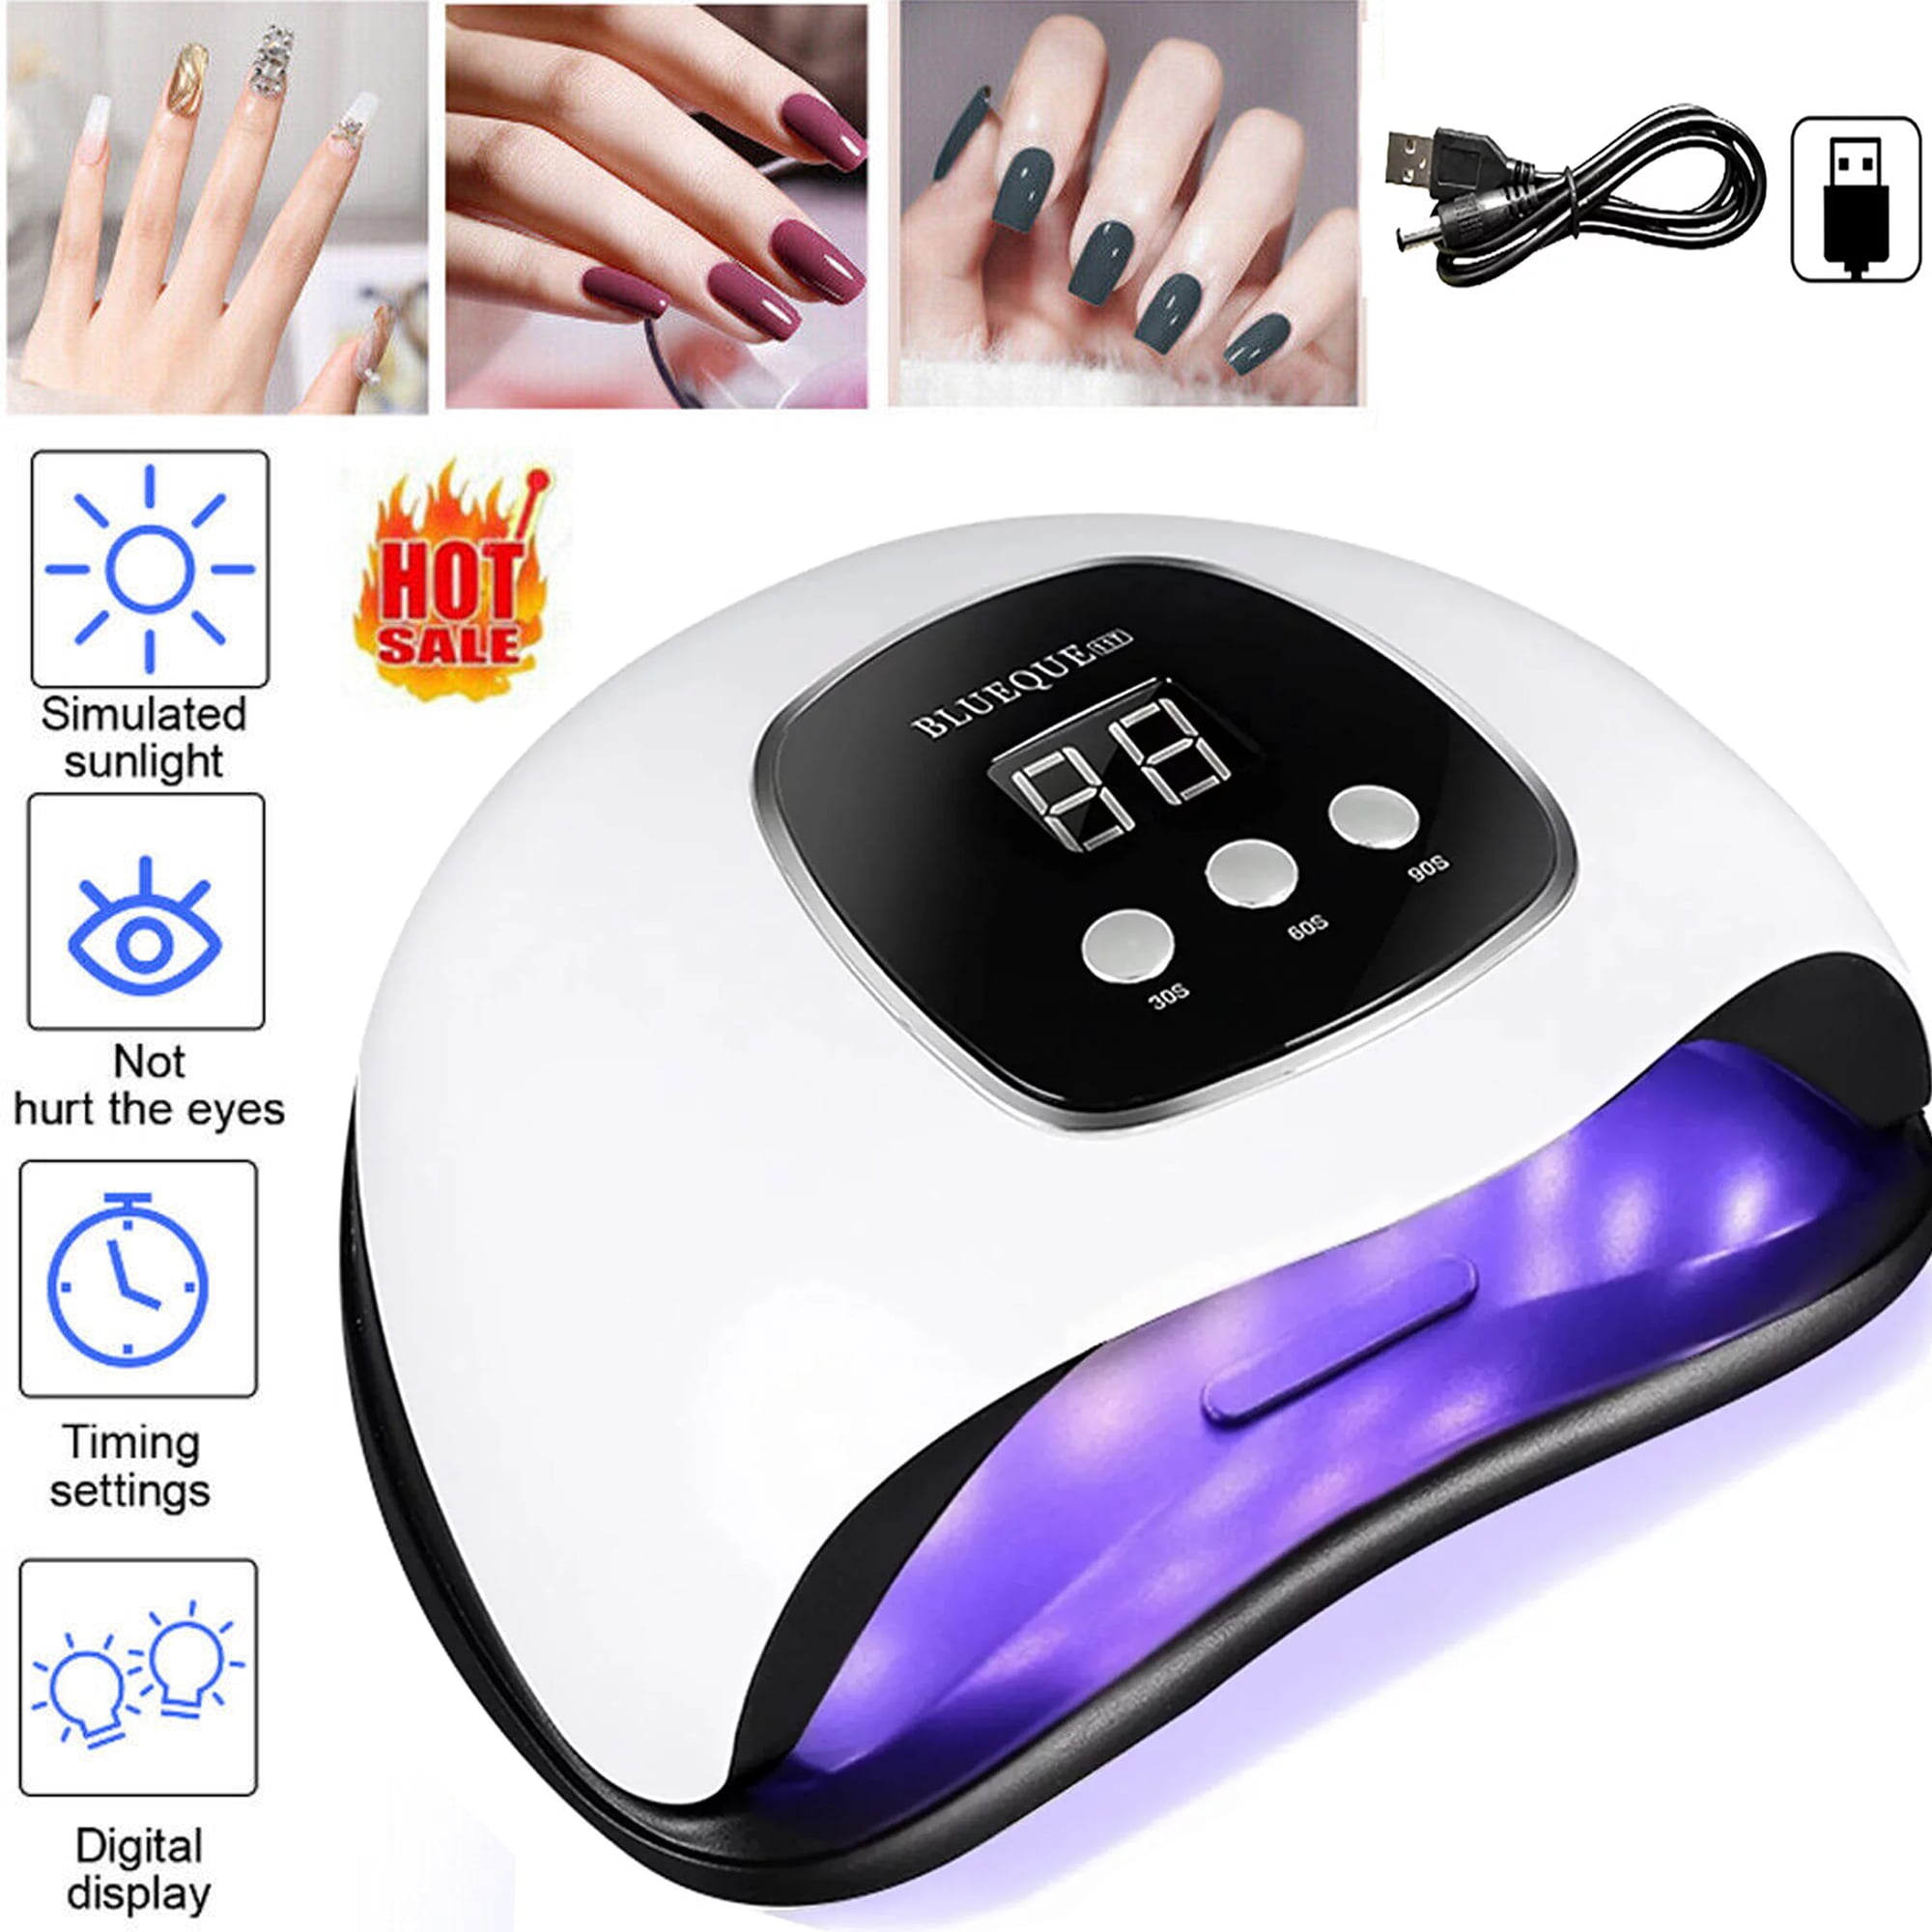 Do UV Nail Dryers for Gel Manicures Cause Skin Cancer?